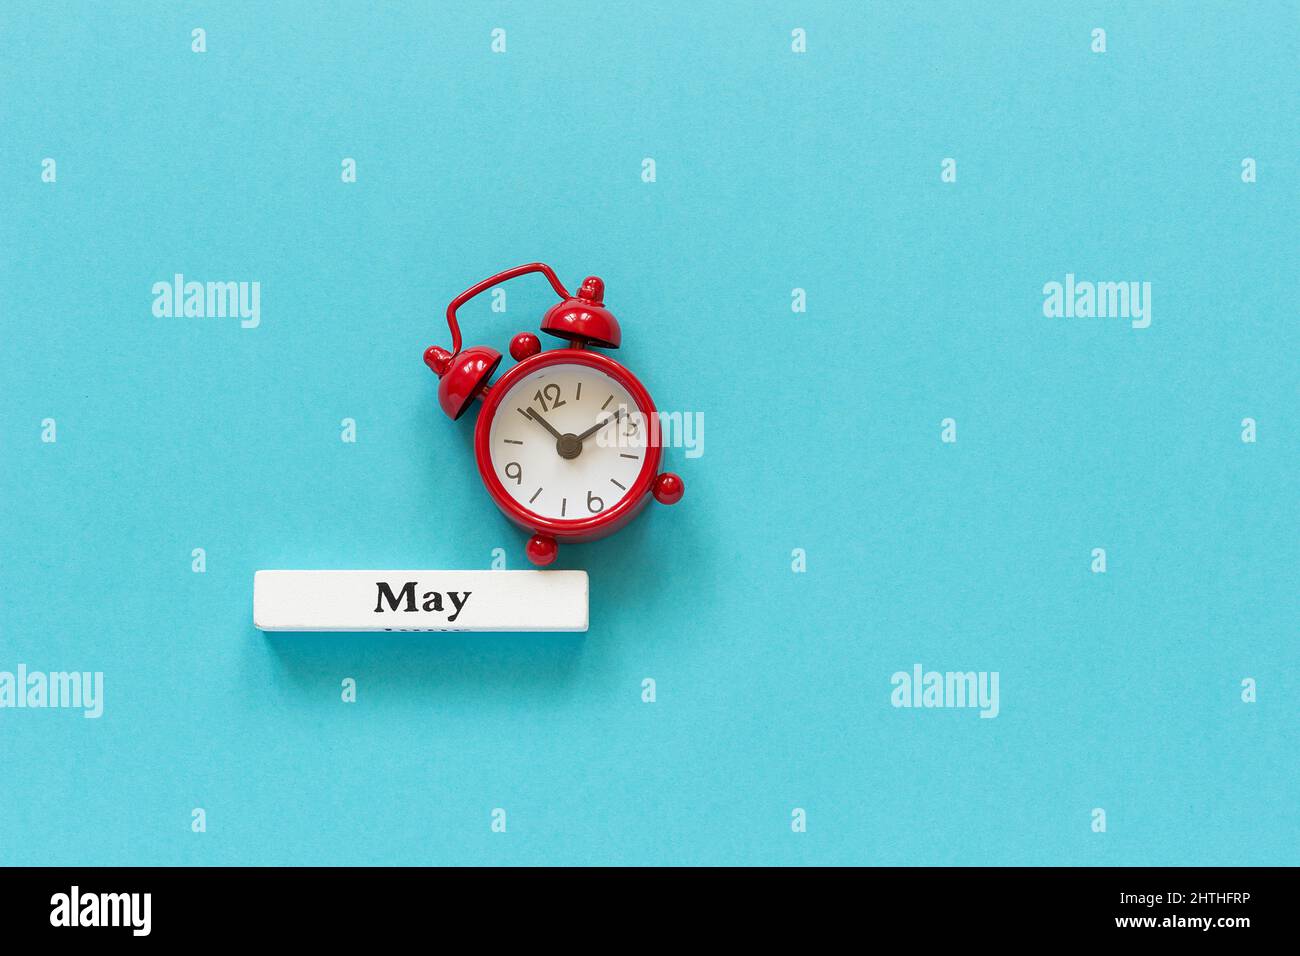 Wooden calendar spring month May and red alarm clock on blue paper background. Concept Hello May or Good bye May Creative Top view Flat Lay Minimal st Stock Photo